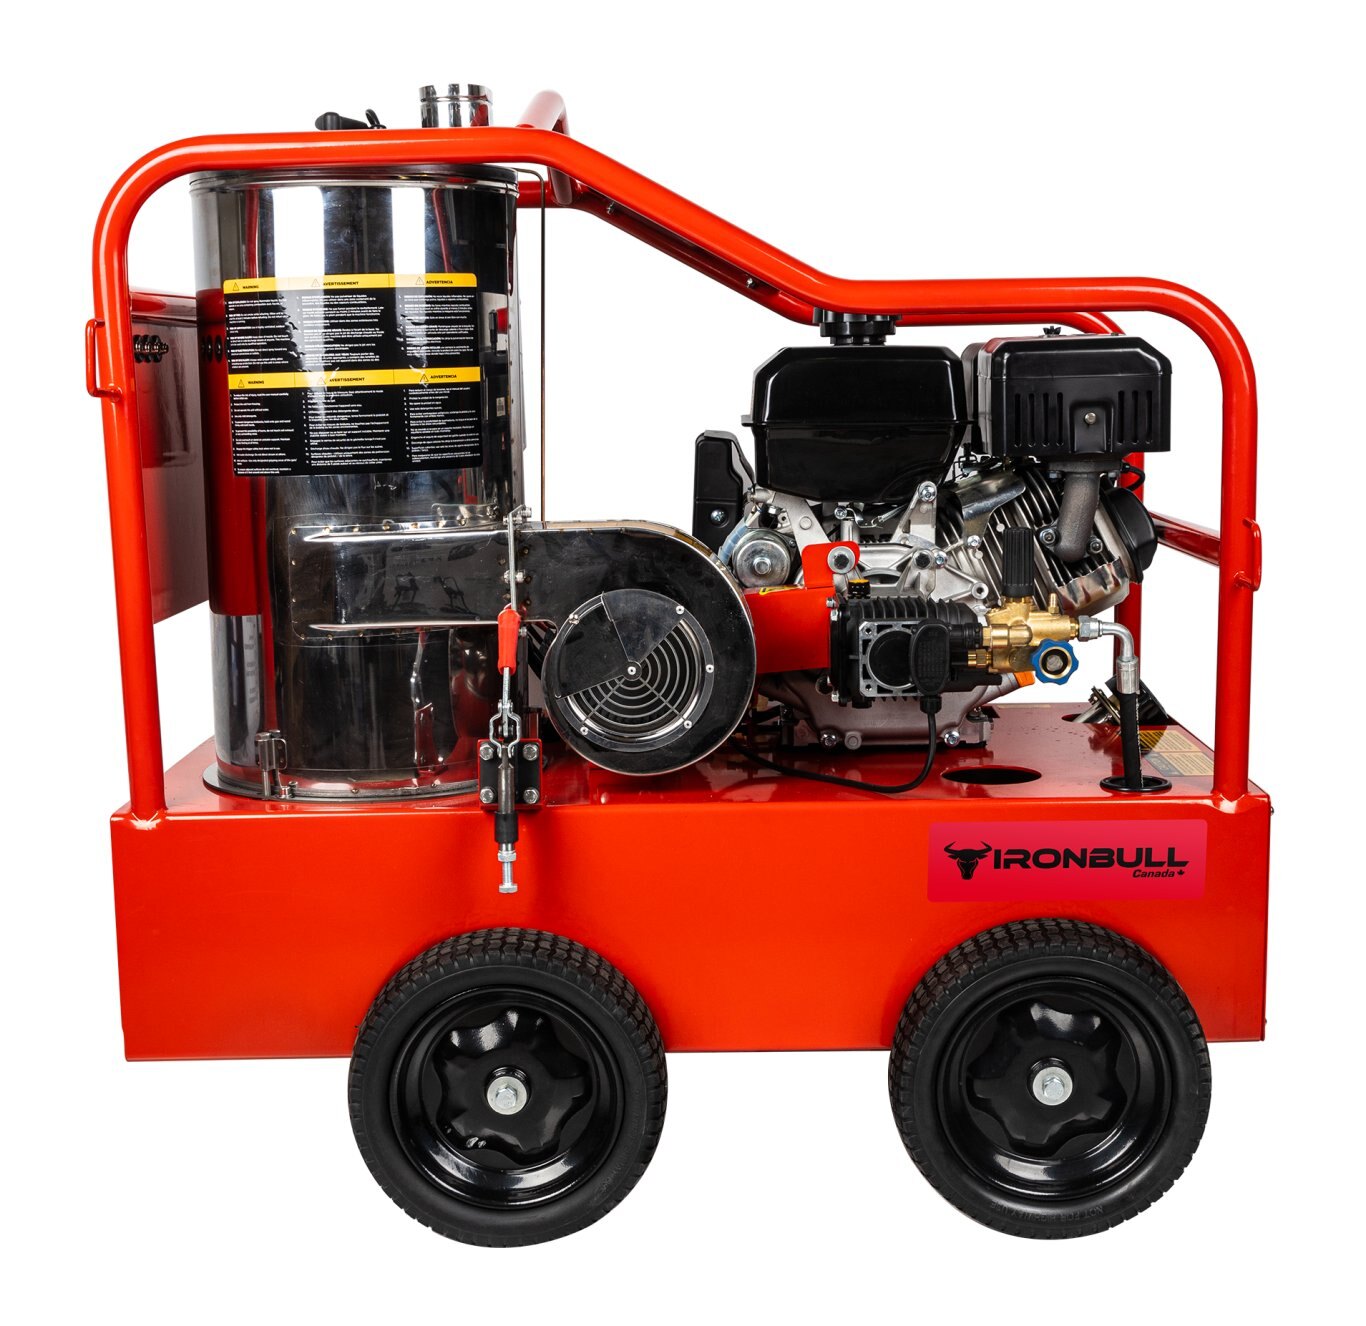 2024 IronBull Hot Water Pressure Washer 4,000PSI 4.0GPM (7 IN STOCK)